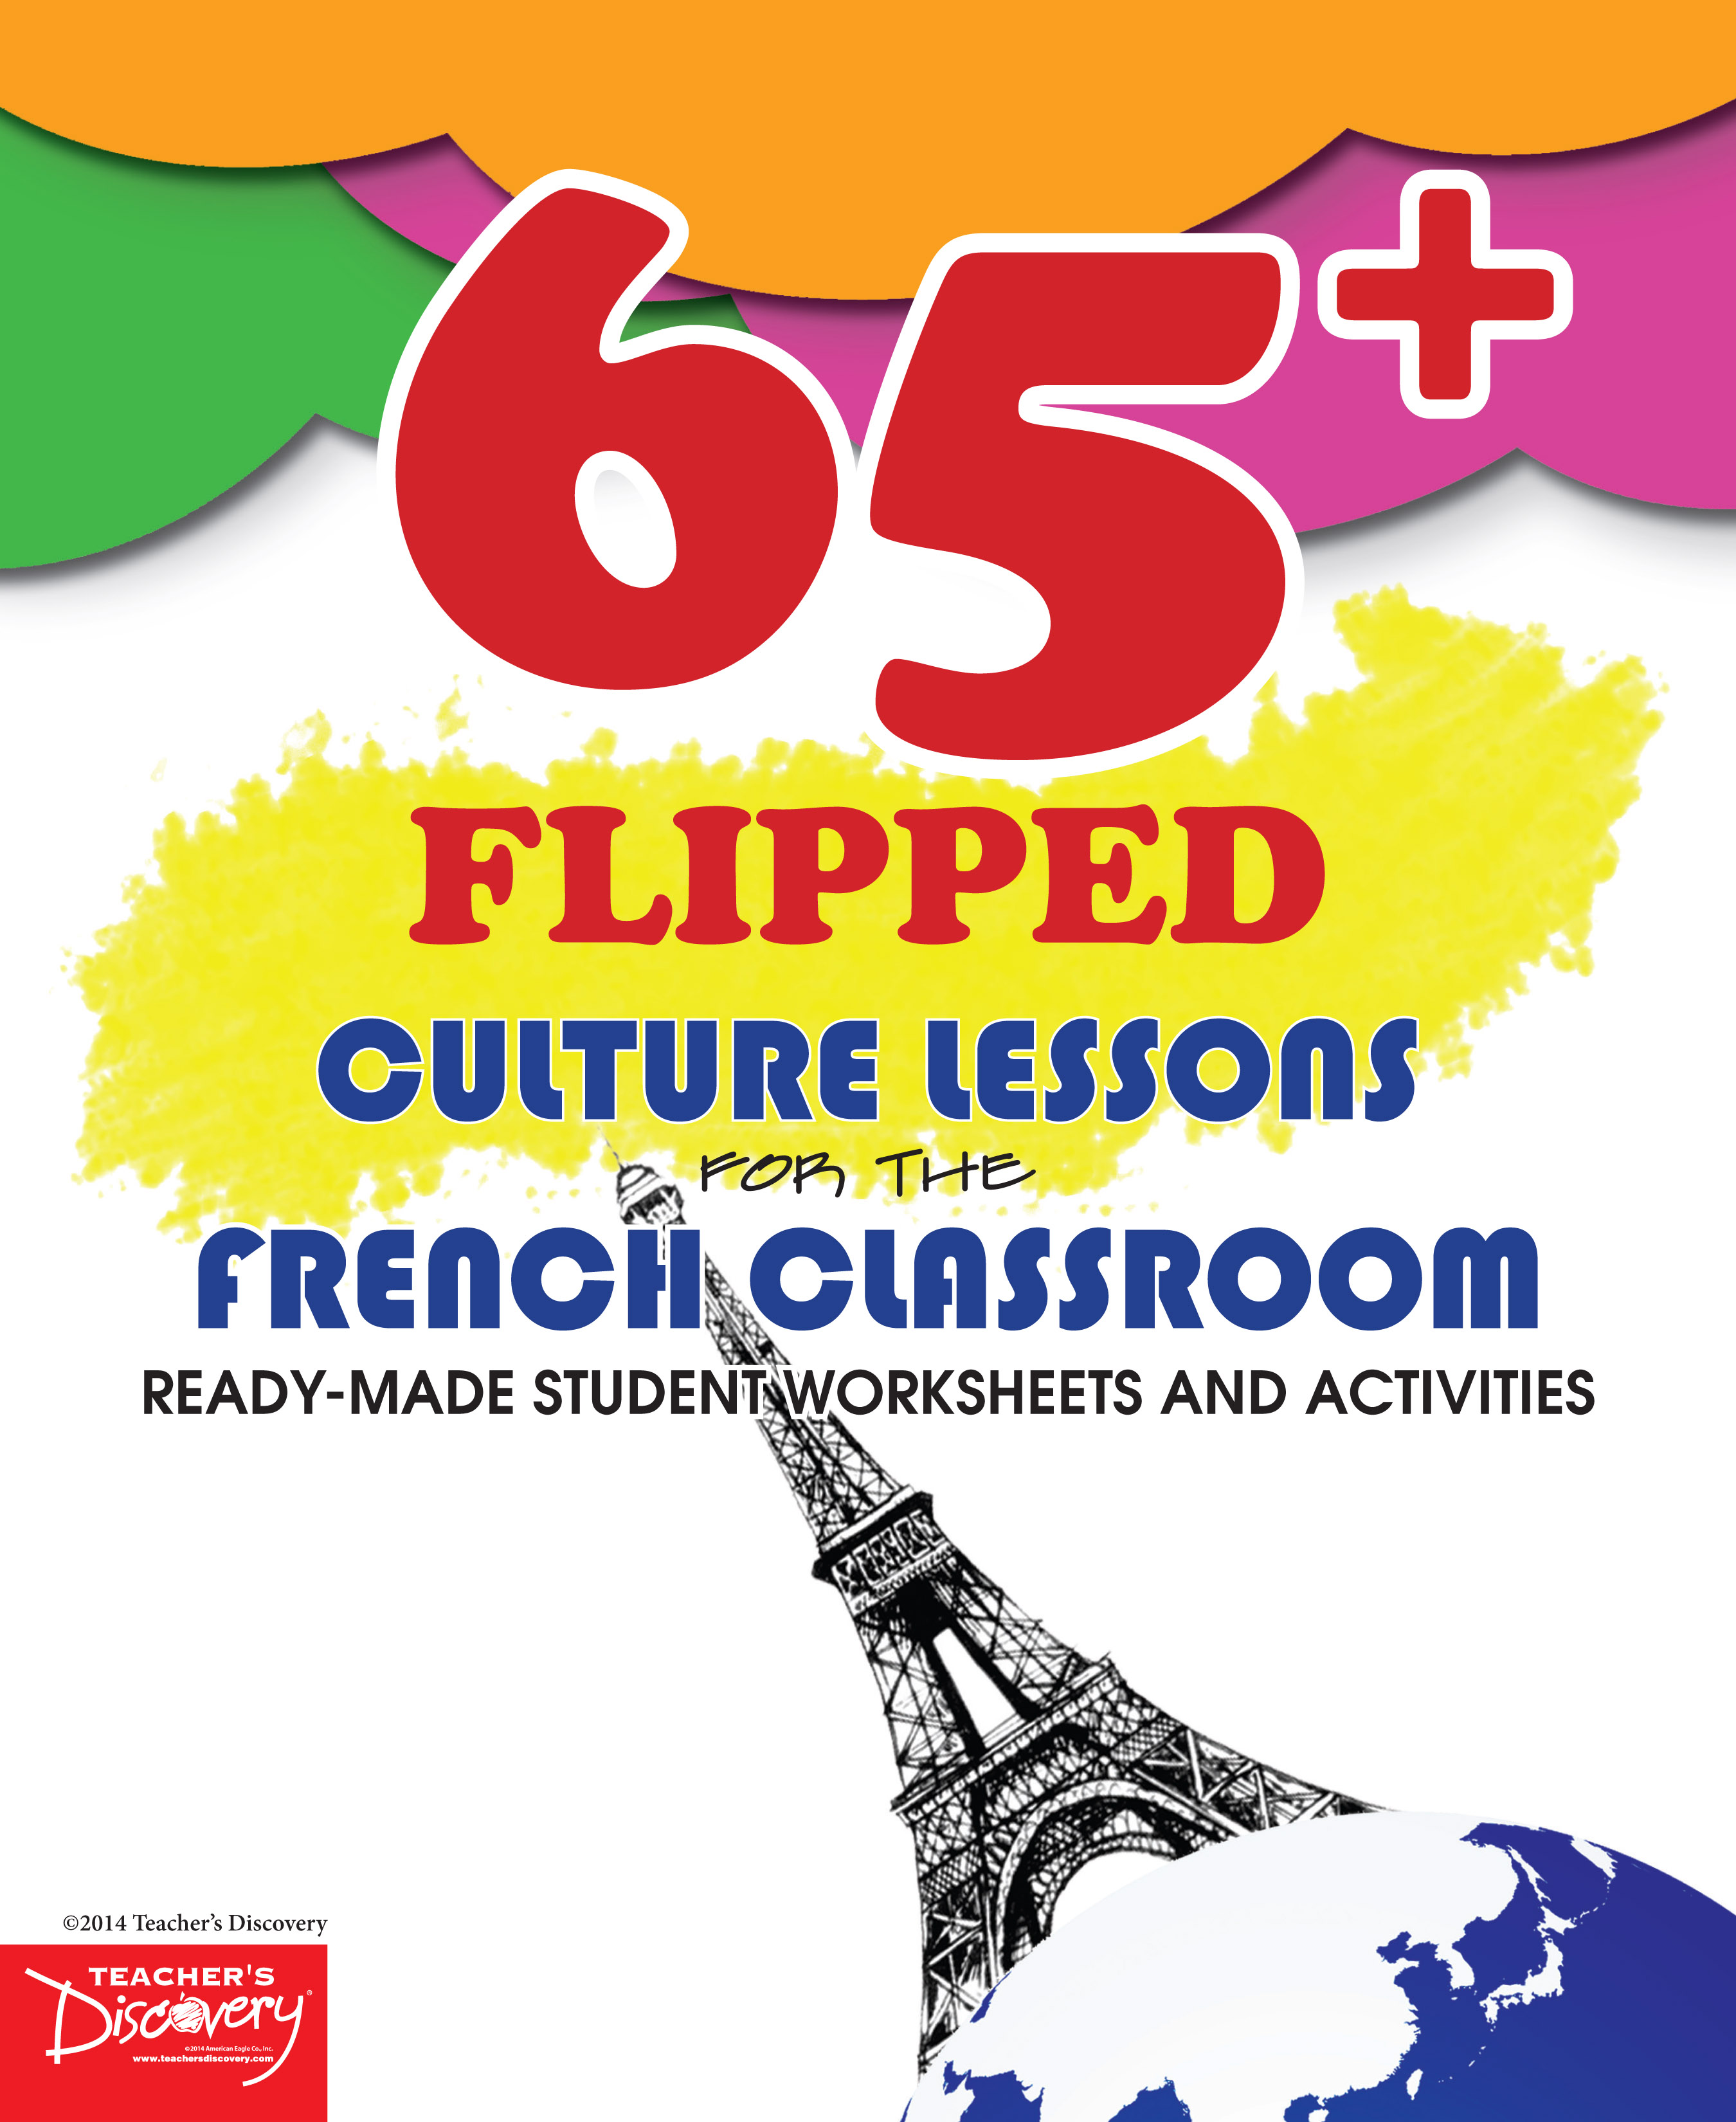 65+ Flipped Culture Lessons for the French Classroom Book